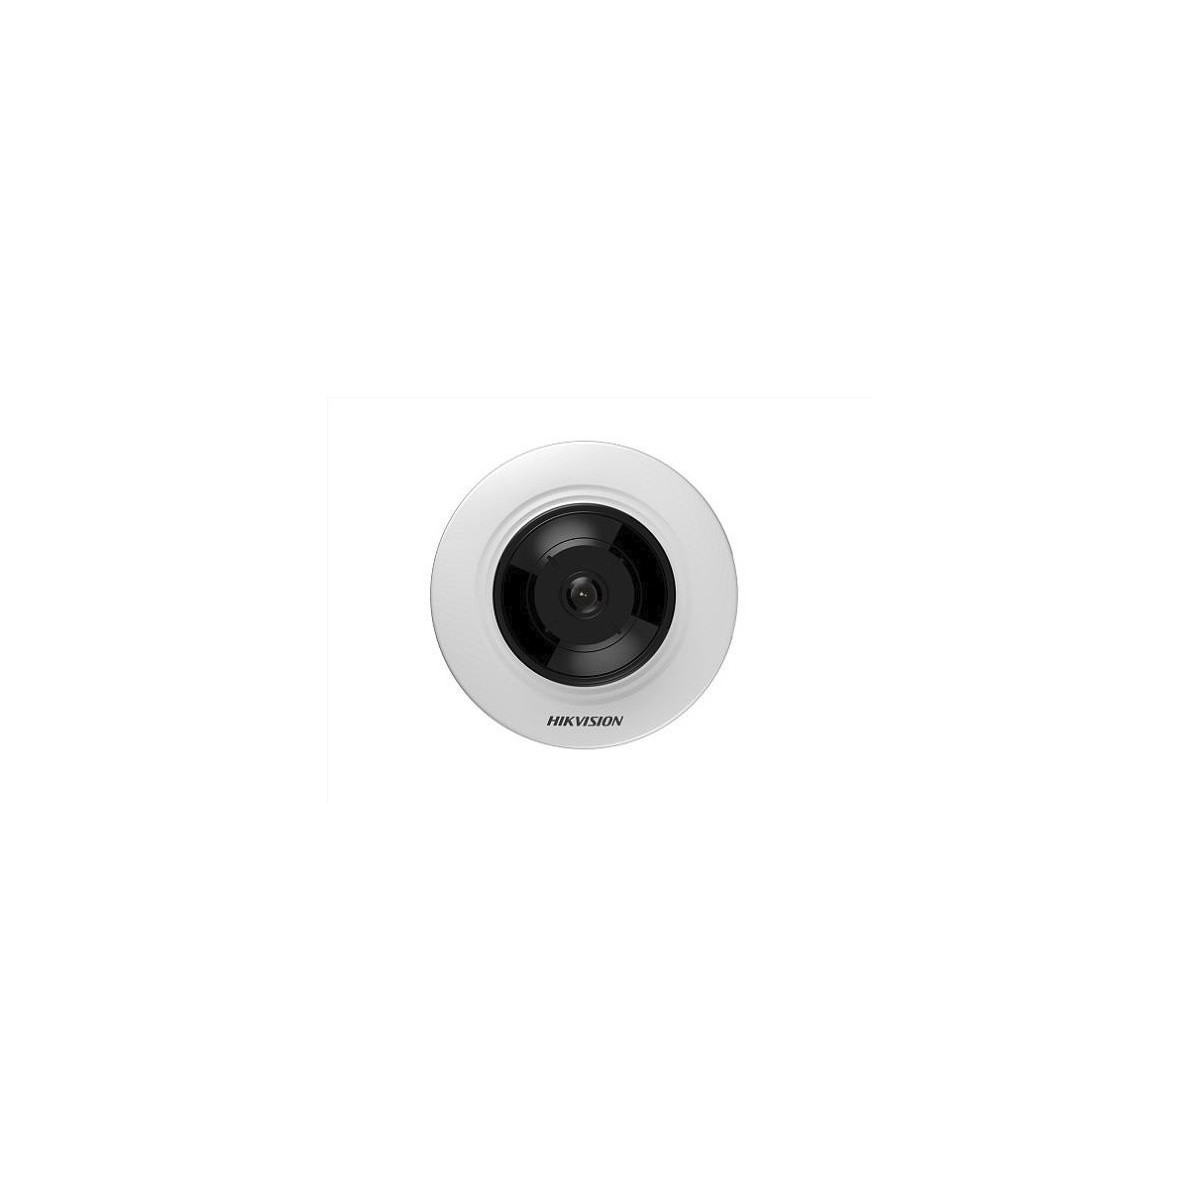 Hikvision Digital Technology DS-2CD2955FWD-I - IP security camera - Indoor - Wired - CE - FCC - Dome - Ceiling/Wall